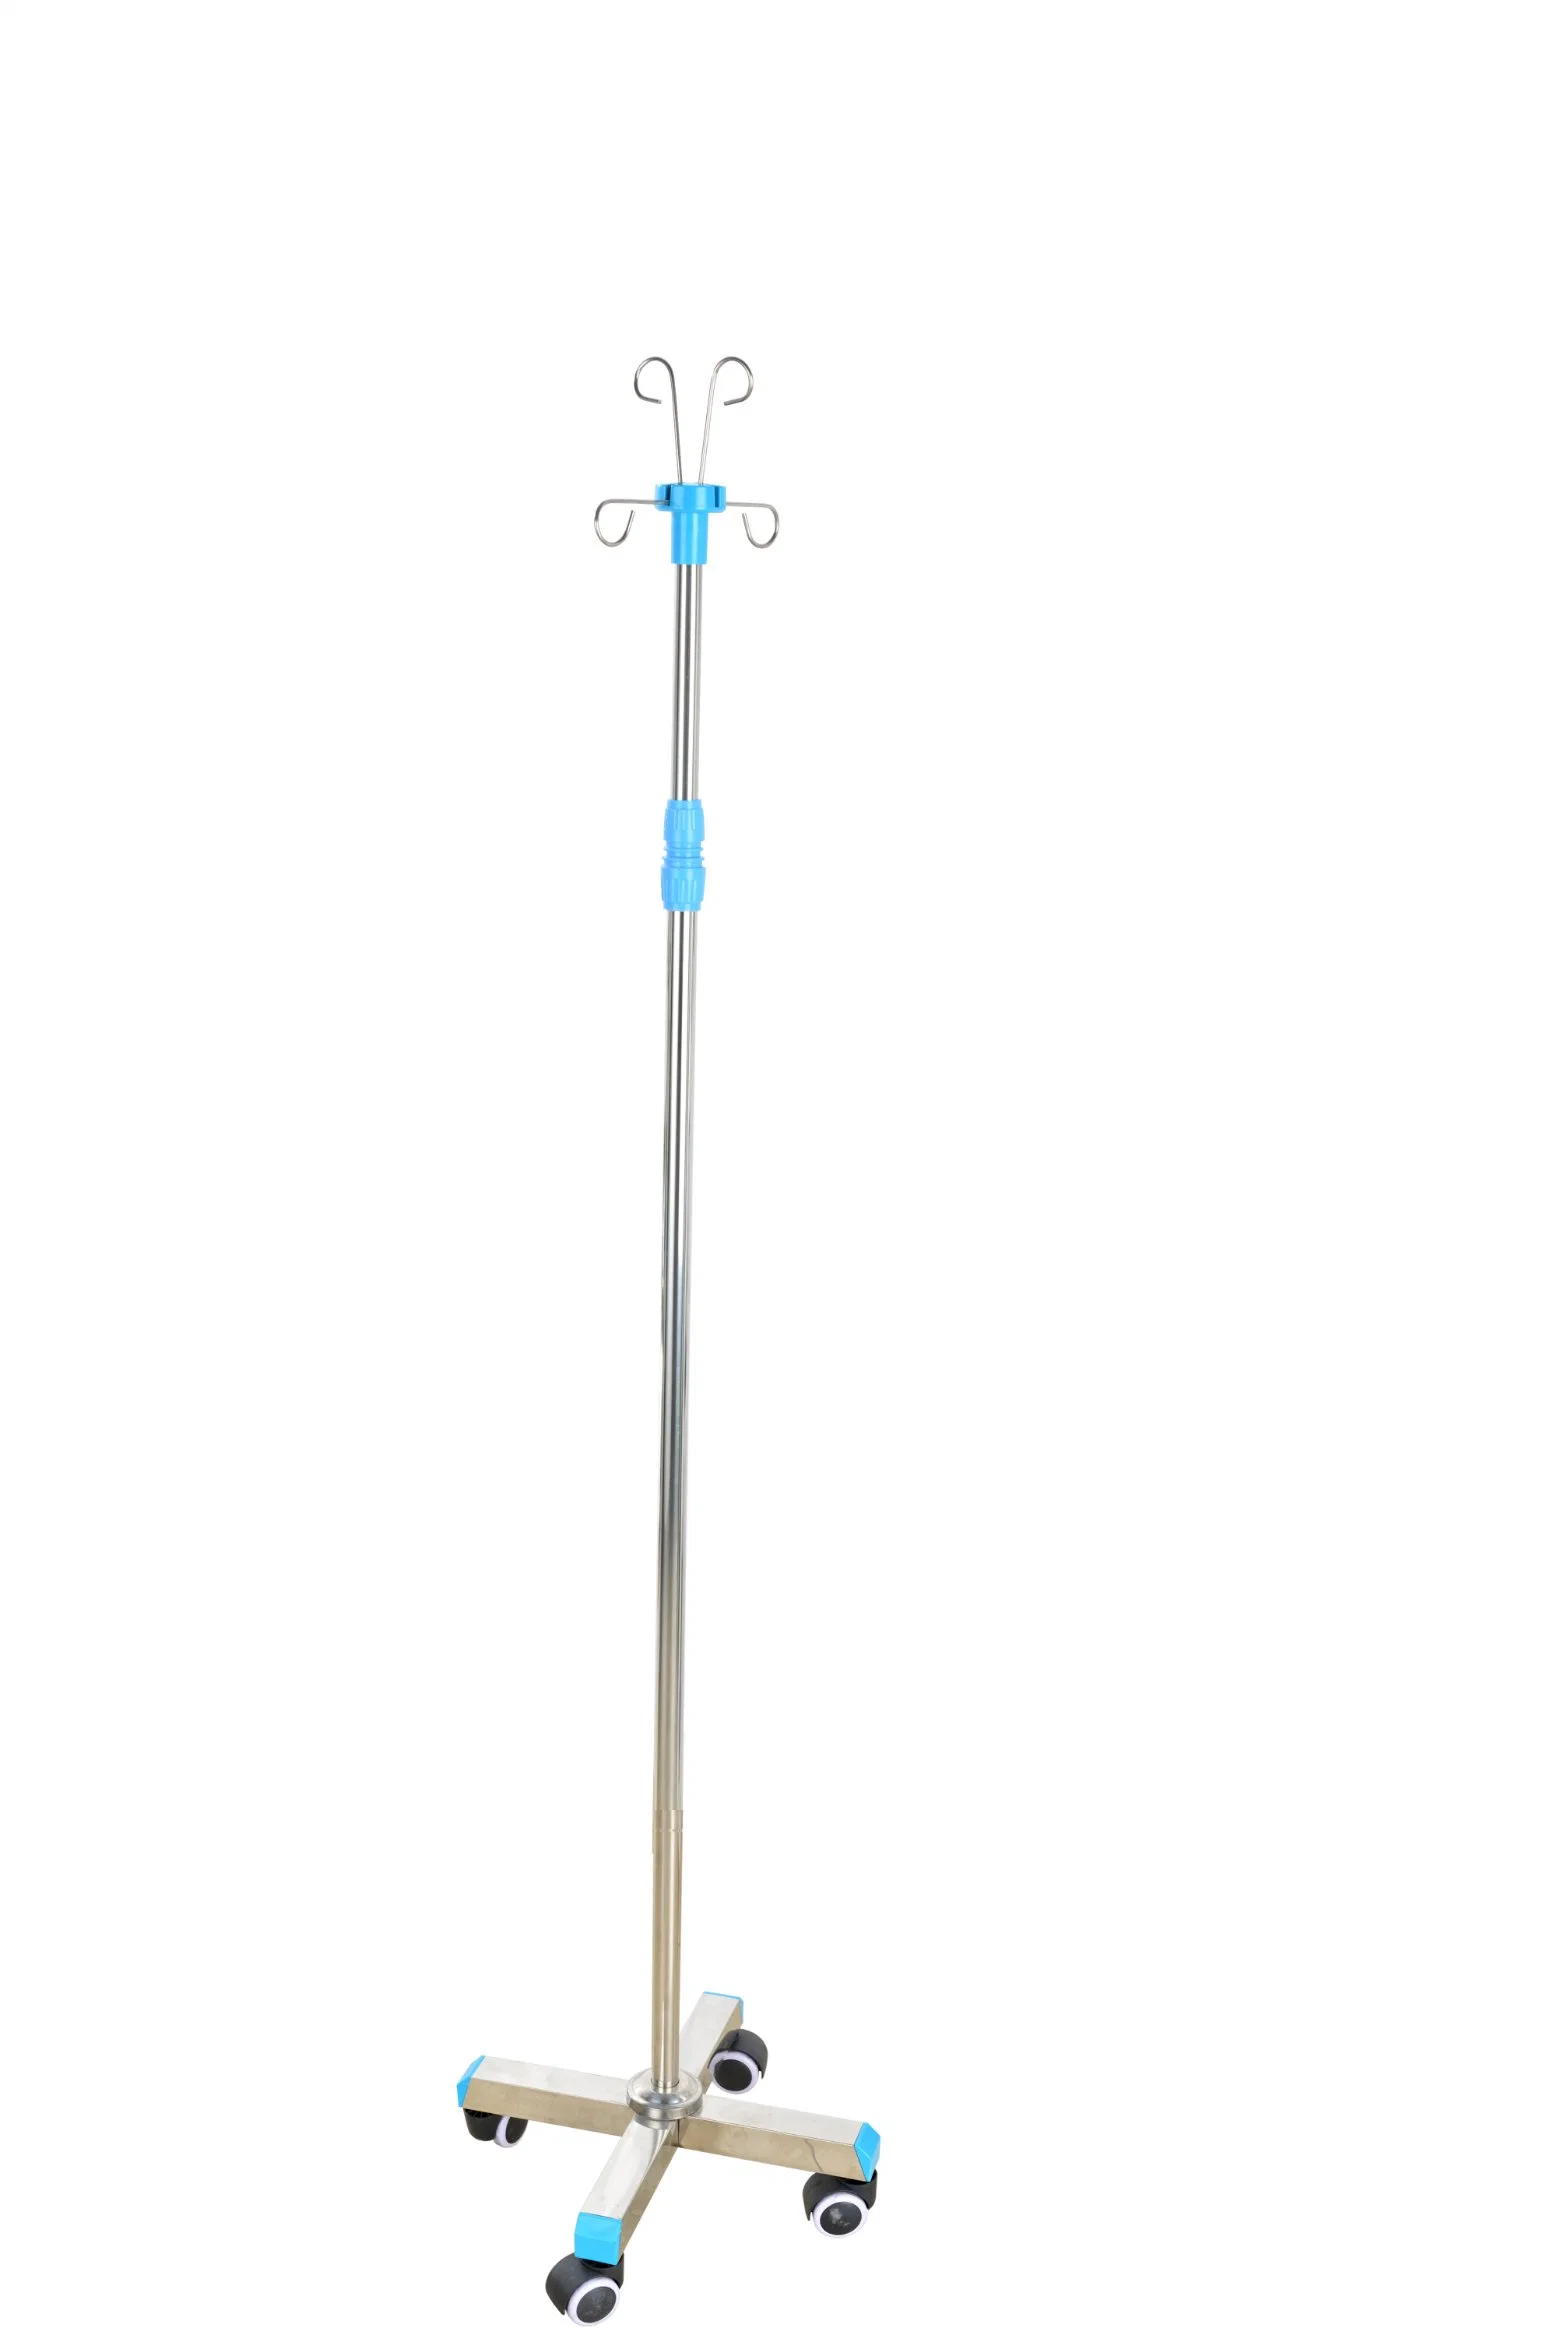 Mn-IV Hospital Stainless Steel Medical Drip Stand Infusion Pole with Hooks